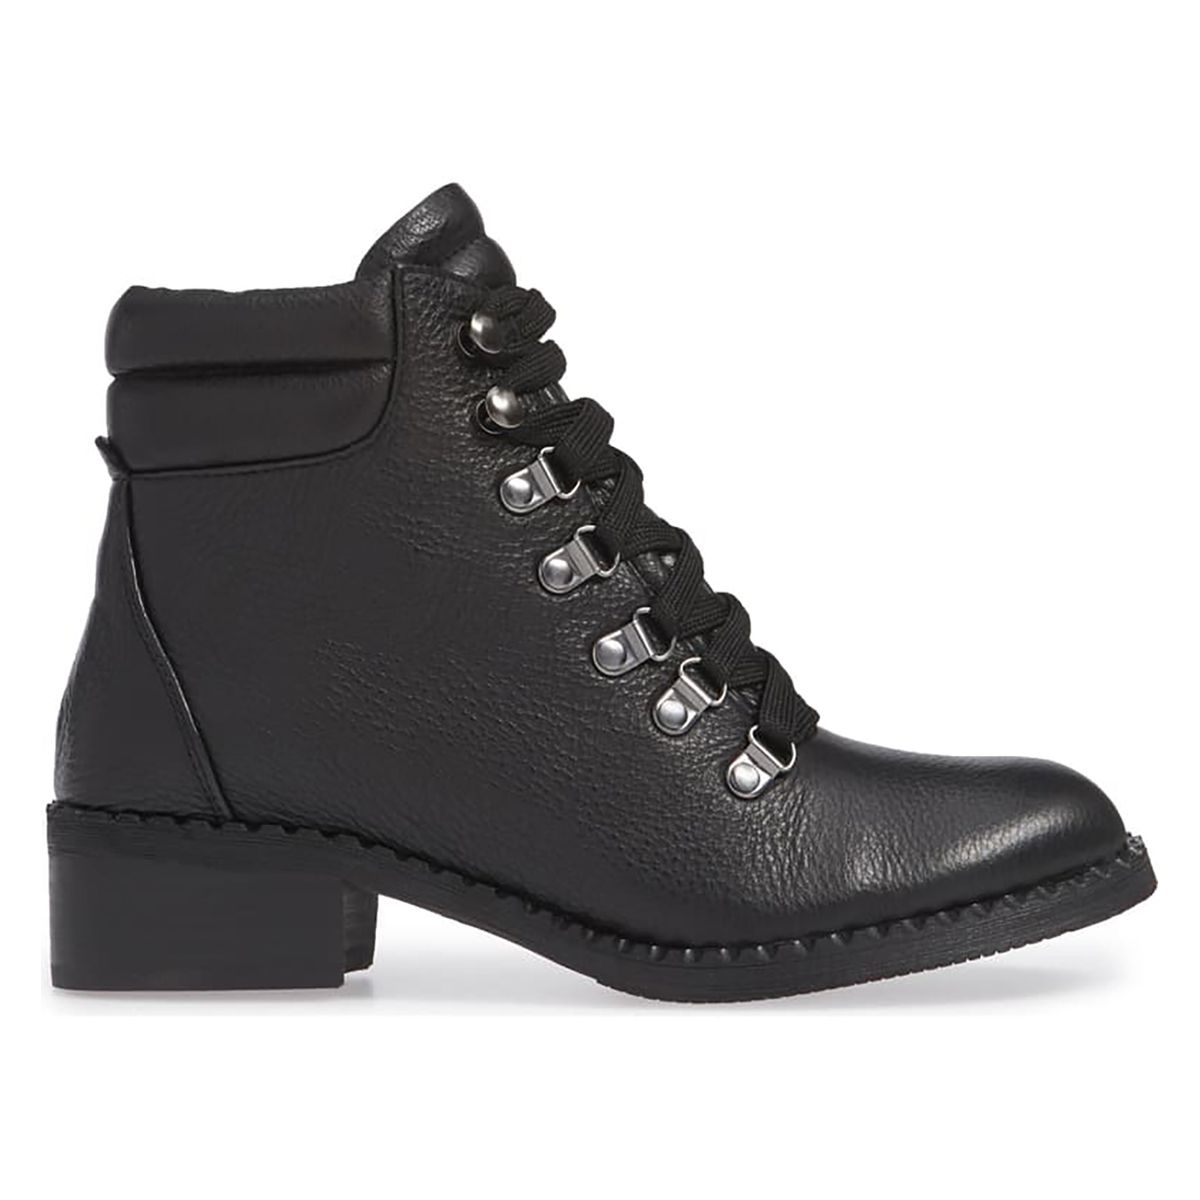 Gentle Souls by Kenneth Cole Brooklyn Combat Boot